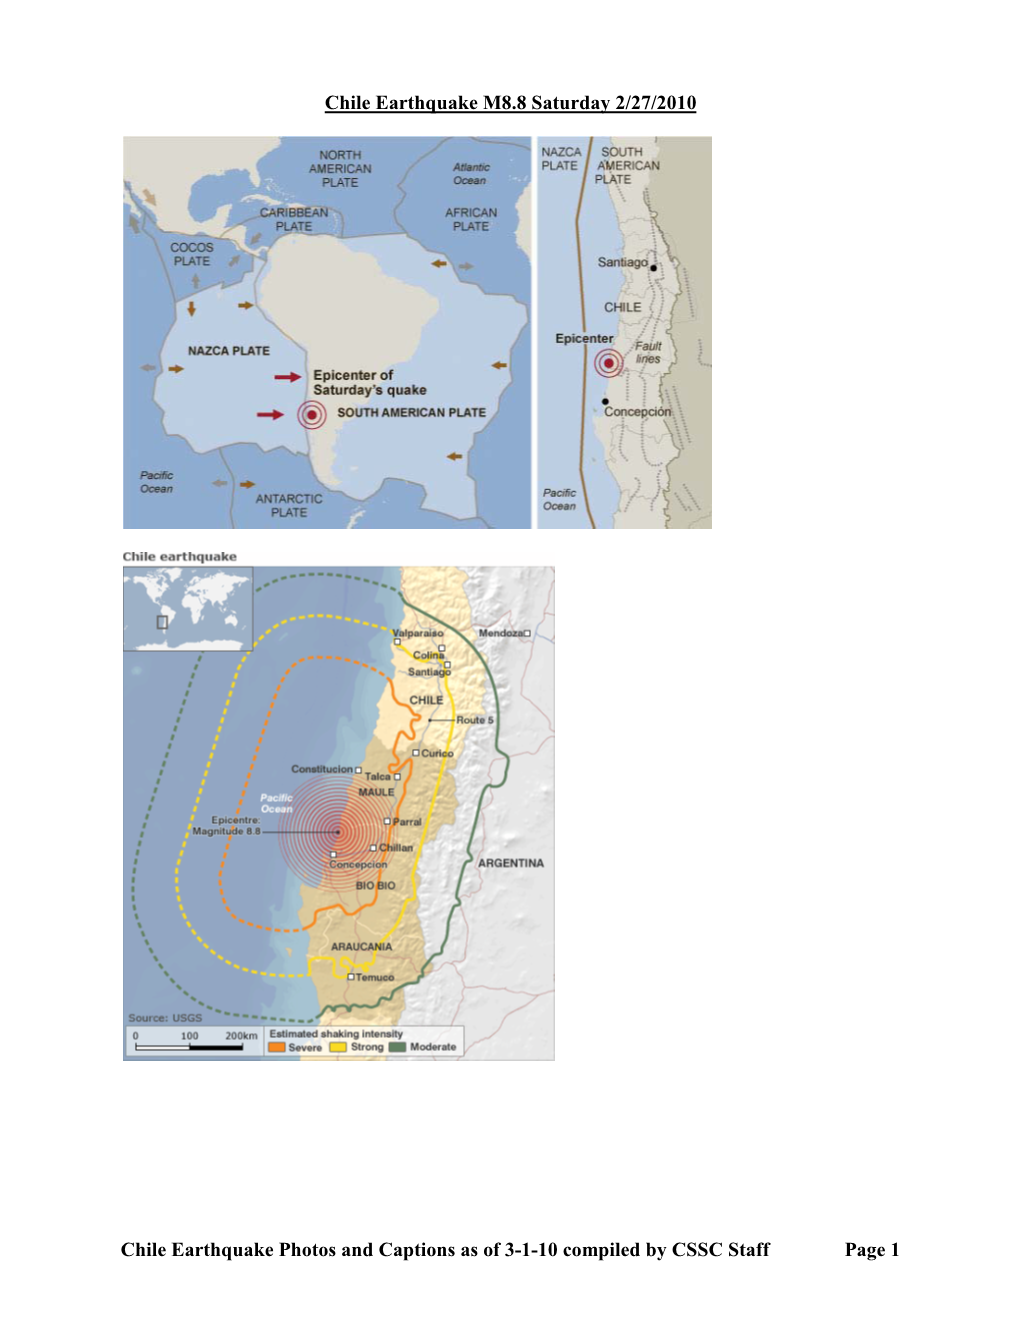 Chile Earthquake Photos and Captions As of 3-1-10 Compiled by CSSC Staff Page 1